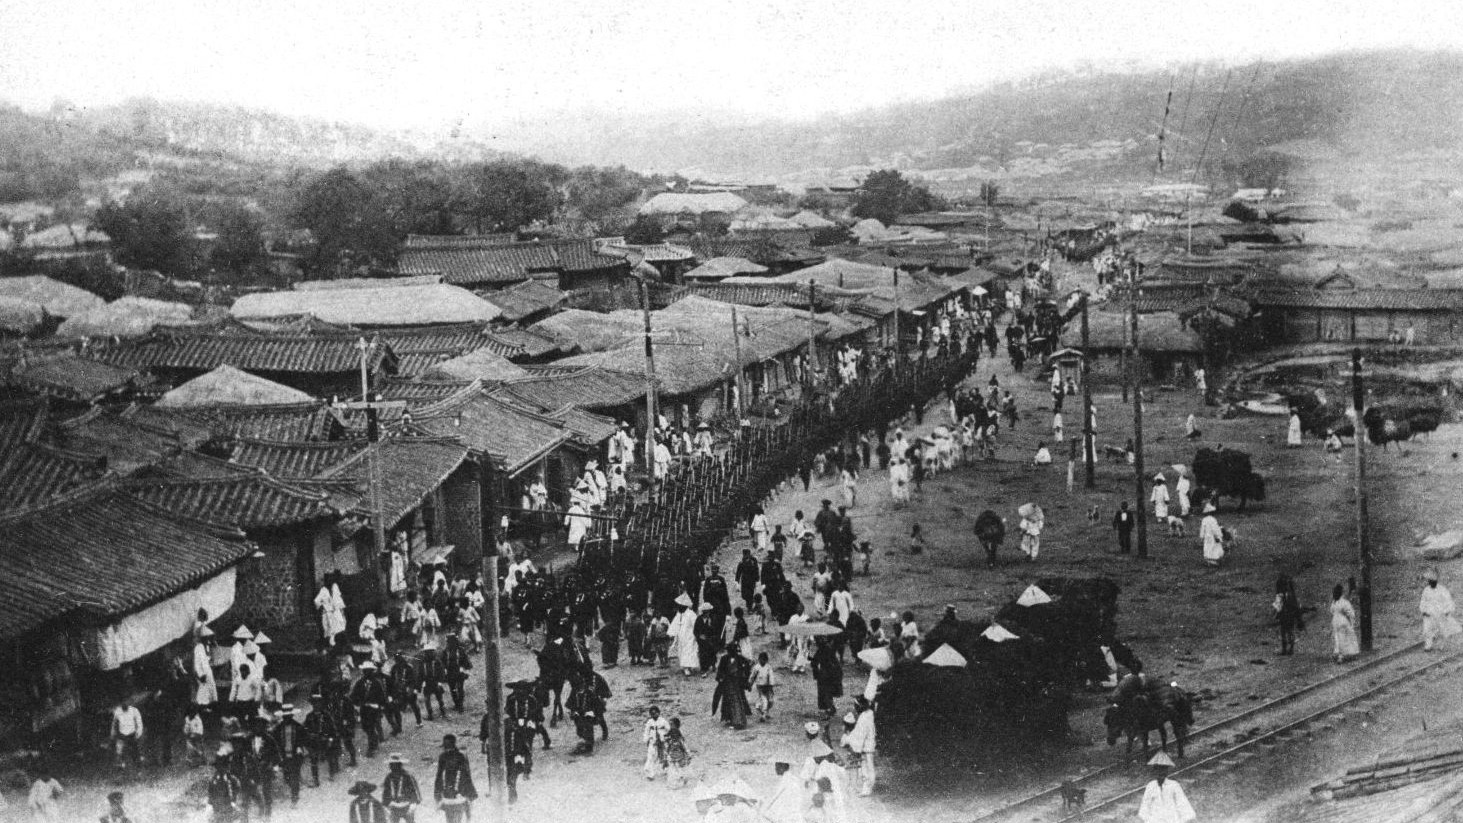 Japanese influence on the Korean peninsula and eventual complete domination had its origin centuries earlier and increased with the Japanese victory in the Russo-Japanese War of 1904-1905. In this photo, Japanese troops march toward the Korean capital of Seoul in 1905.